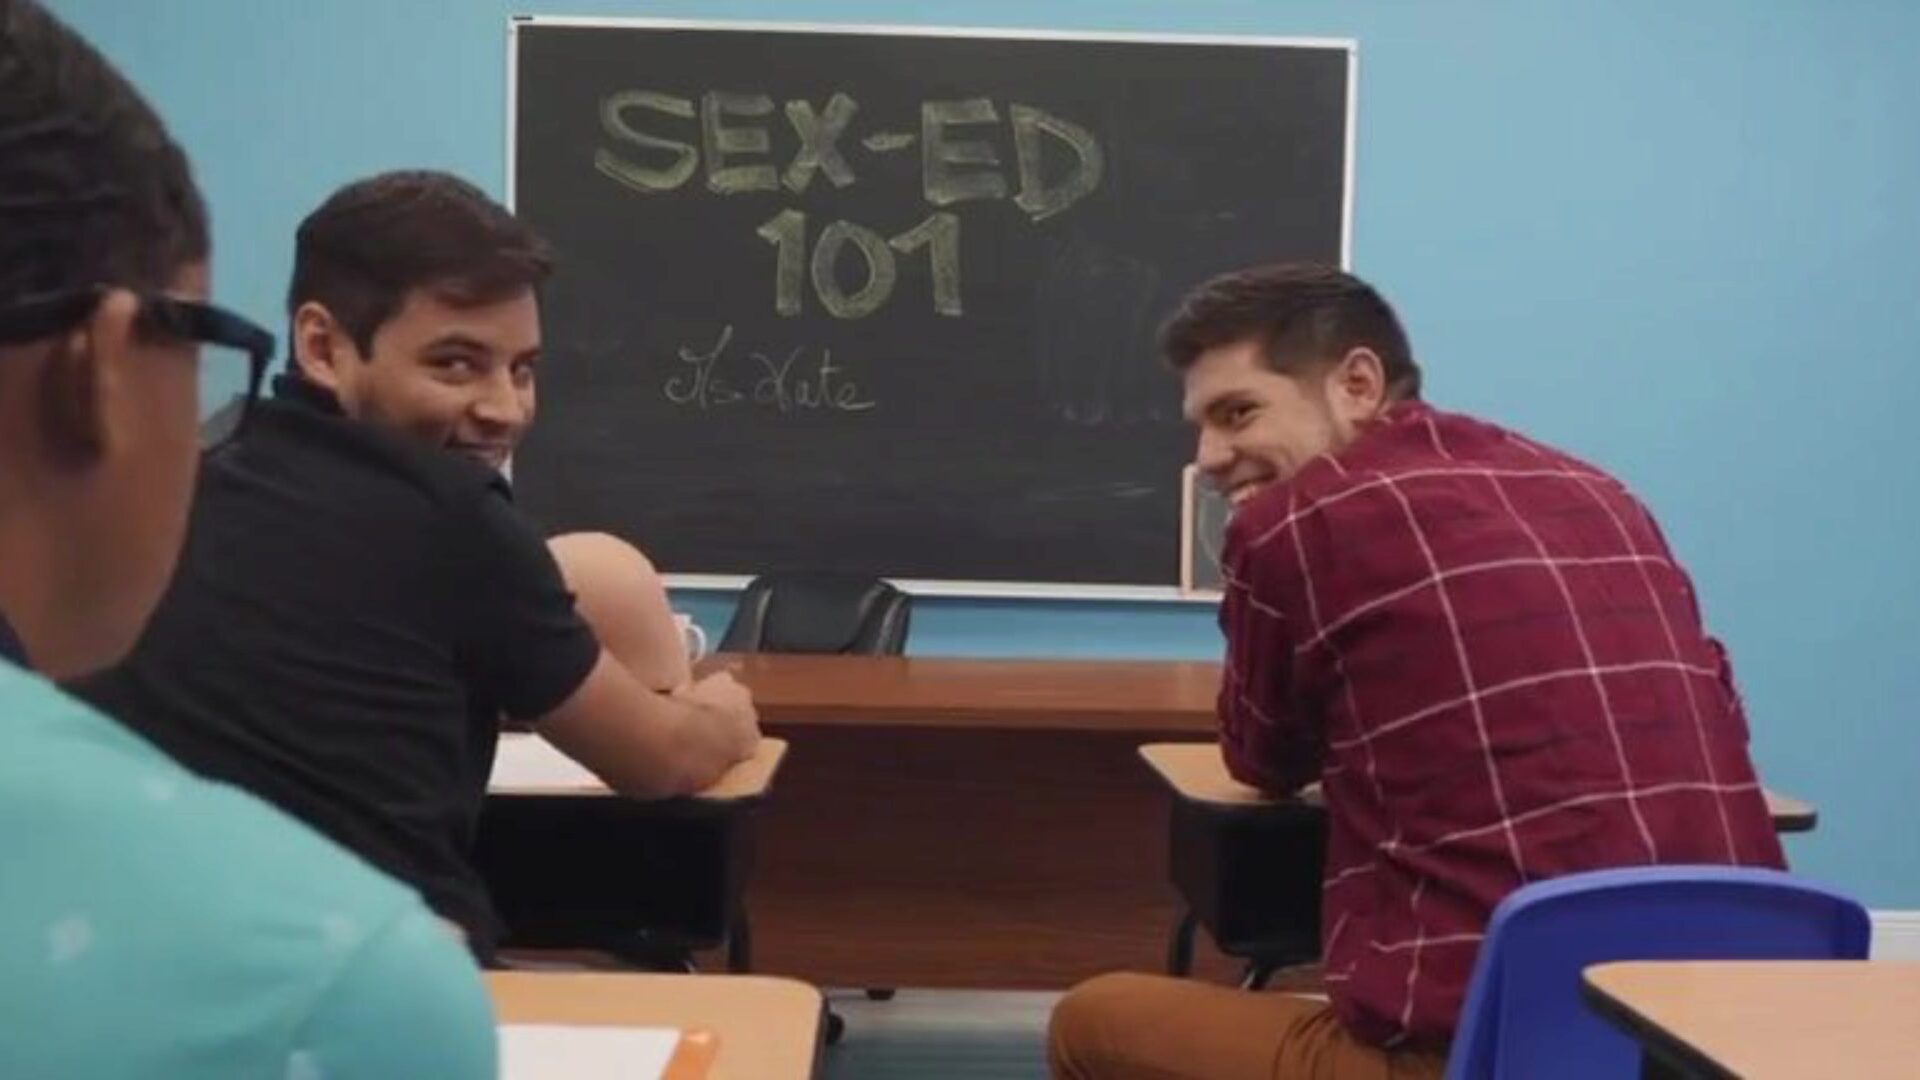 Sex Ed 101 is the Most Excellent one! We do not know what u receive at 102, but this semester looks like it's going to be a insane ride for this class, as the Buxom Anissa Kate is going to be their highly hands-on sex-ed professor